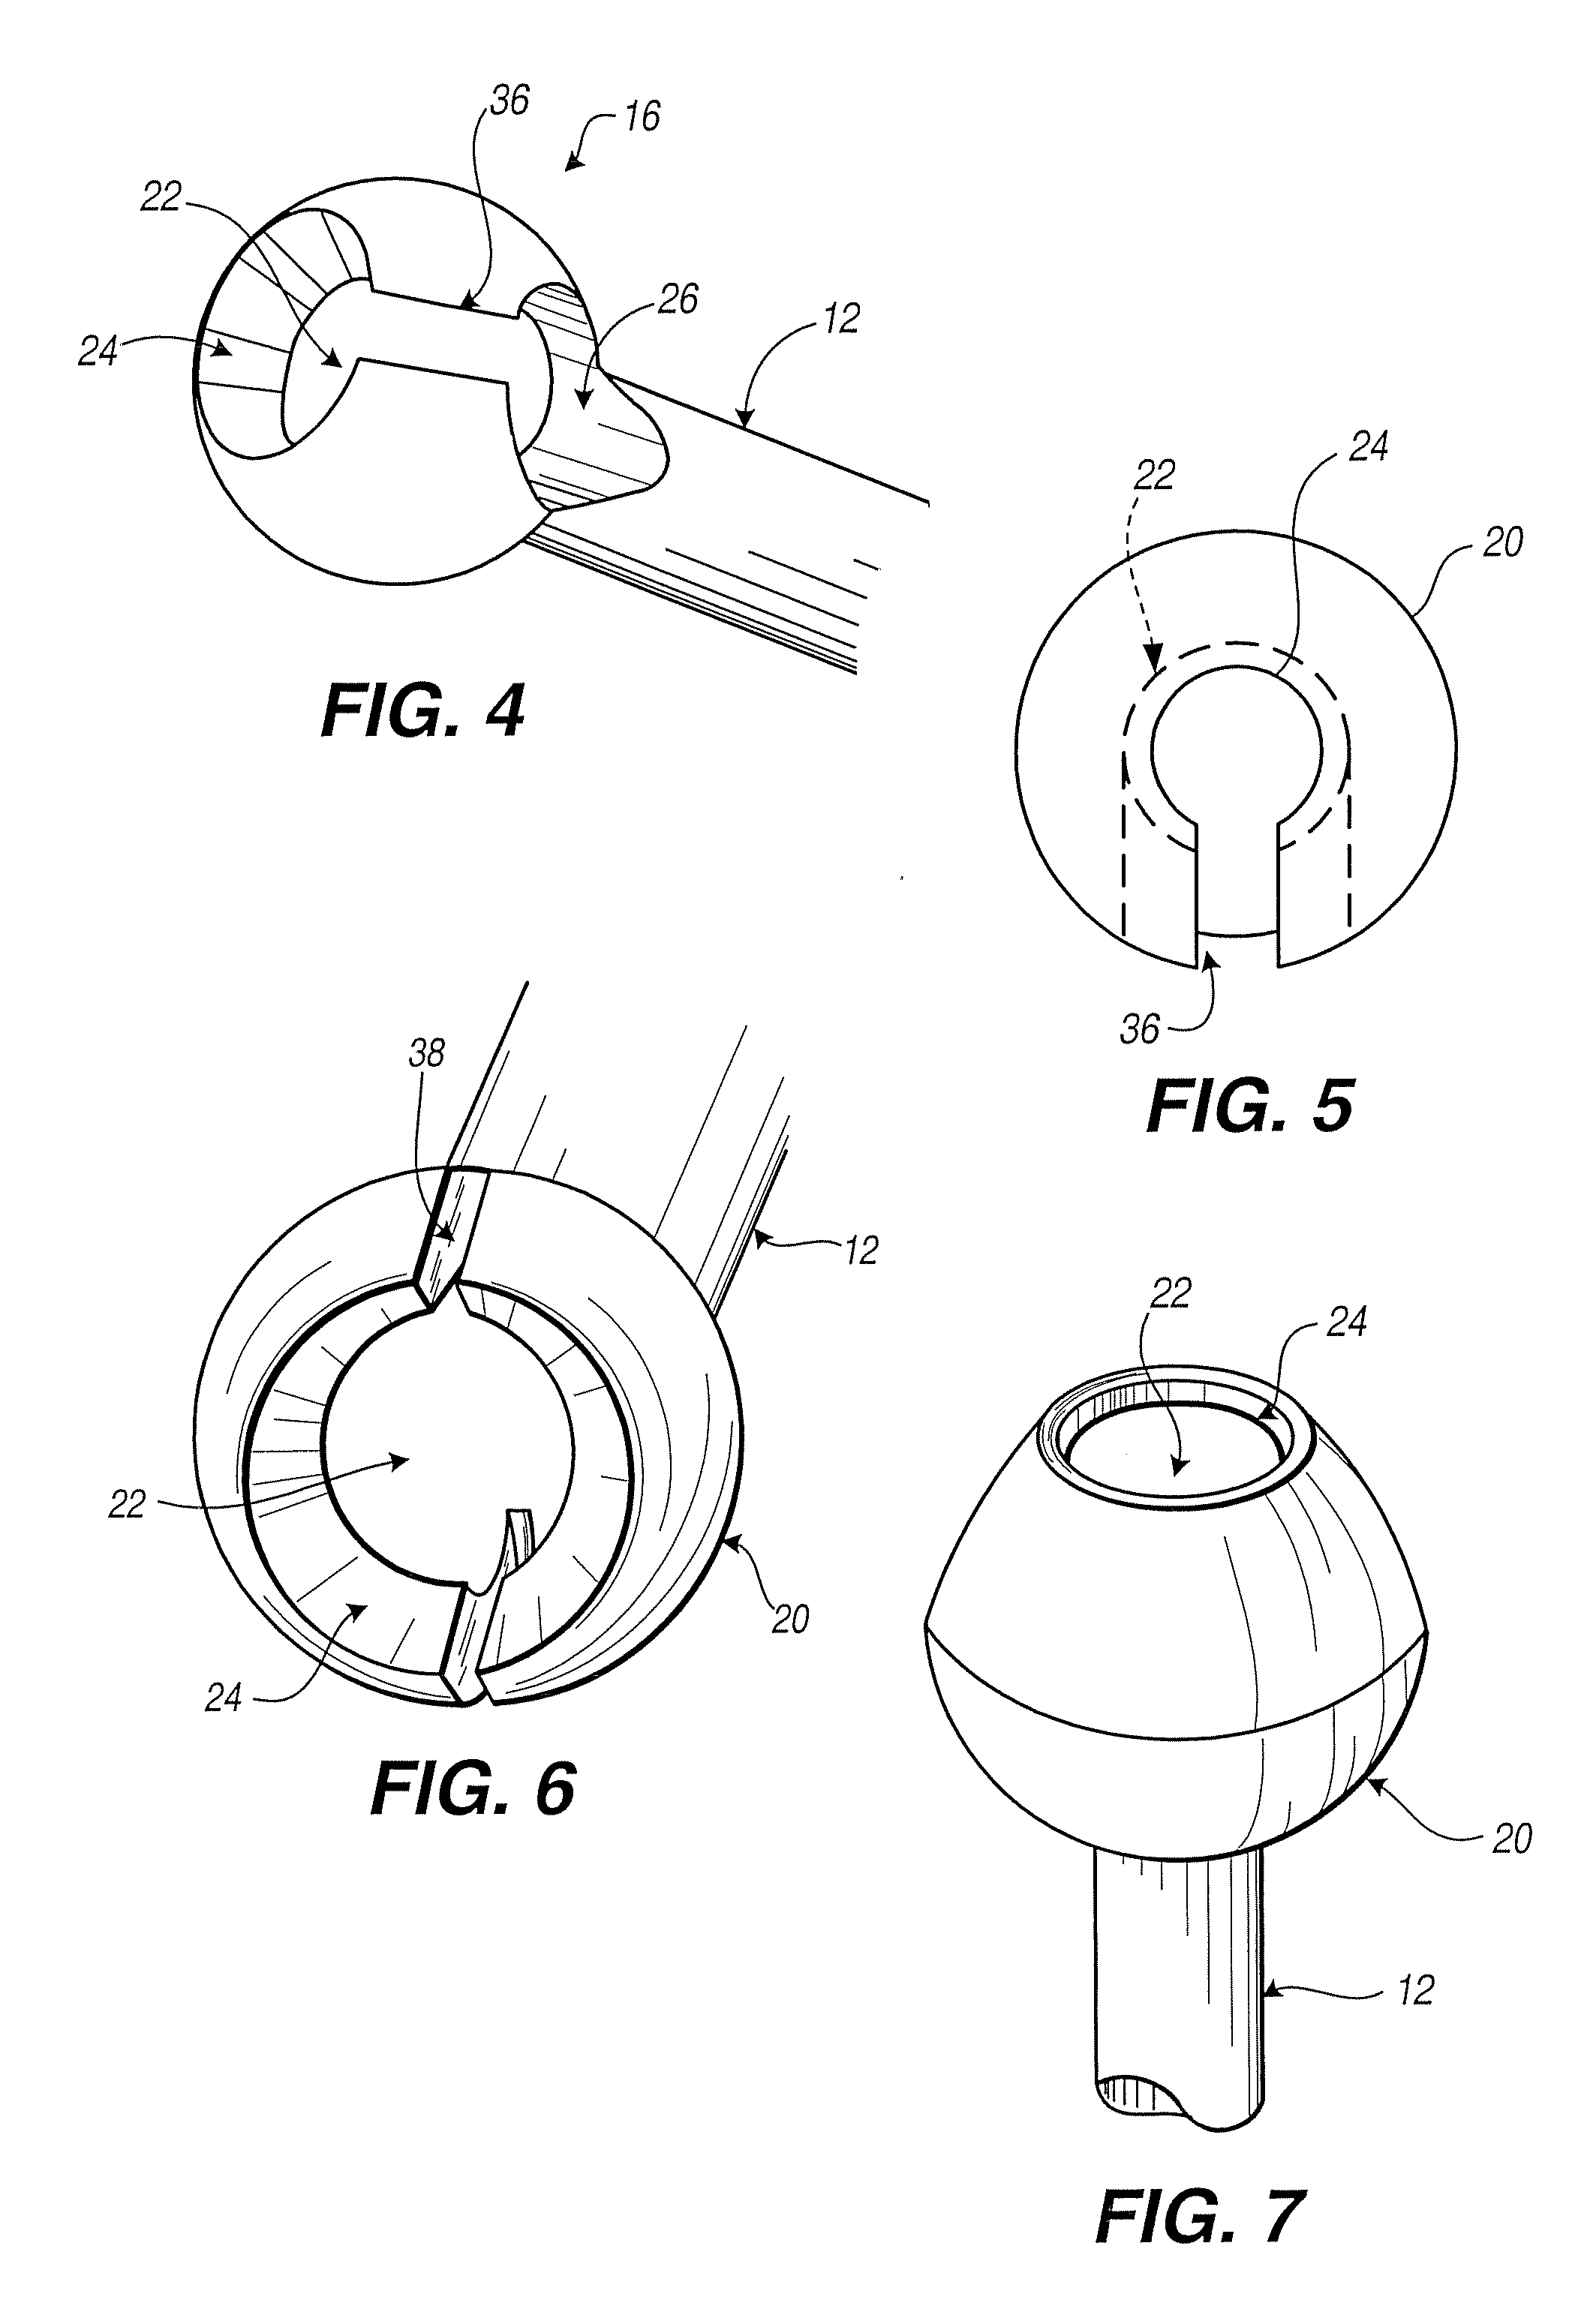 Connection Rod for Screw or Hook Polyaxial System and Method of Use